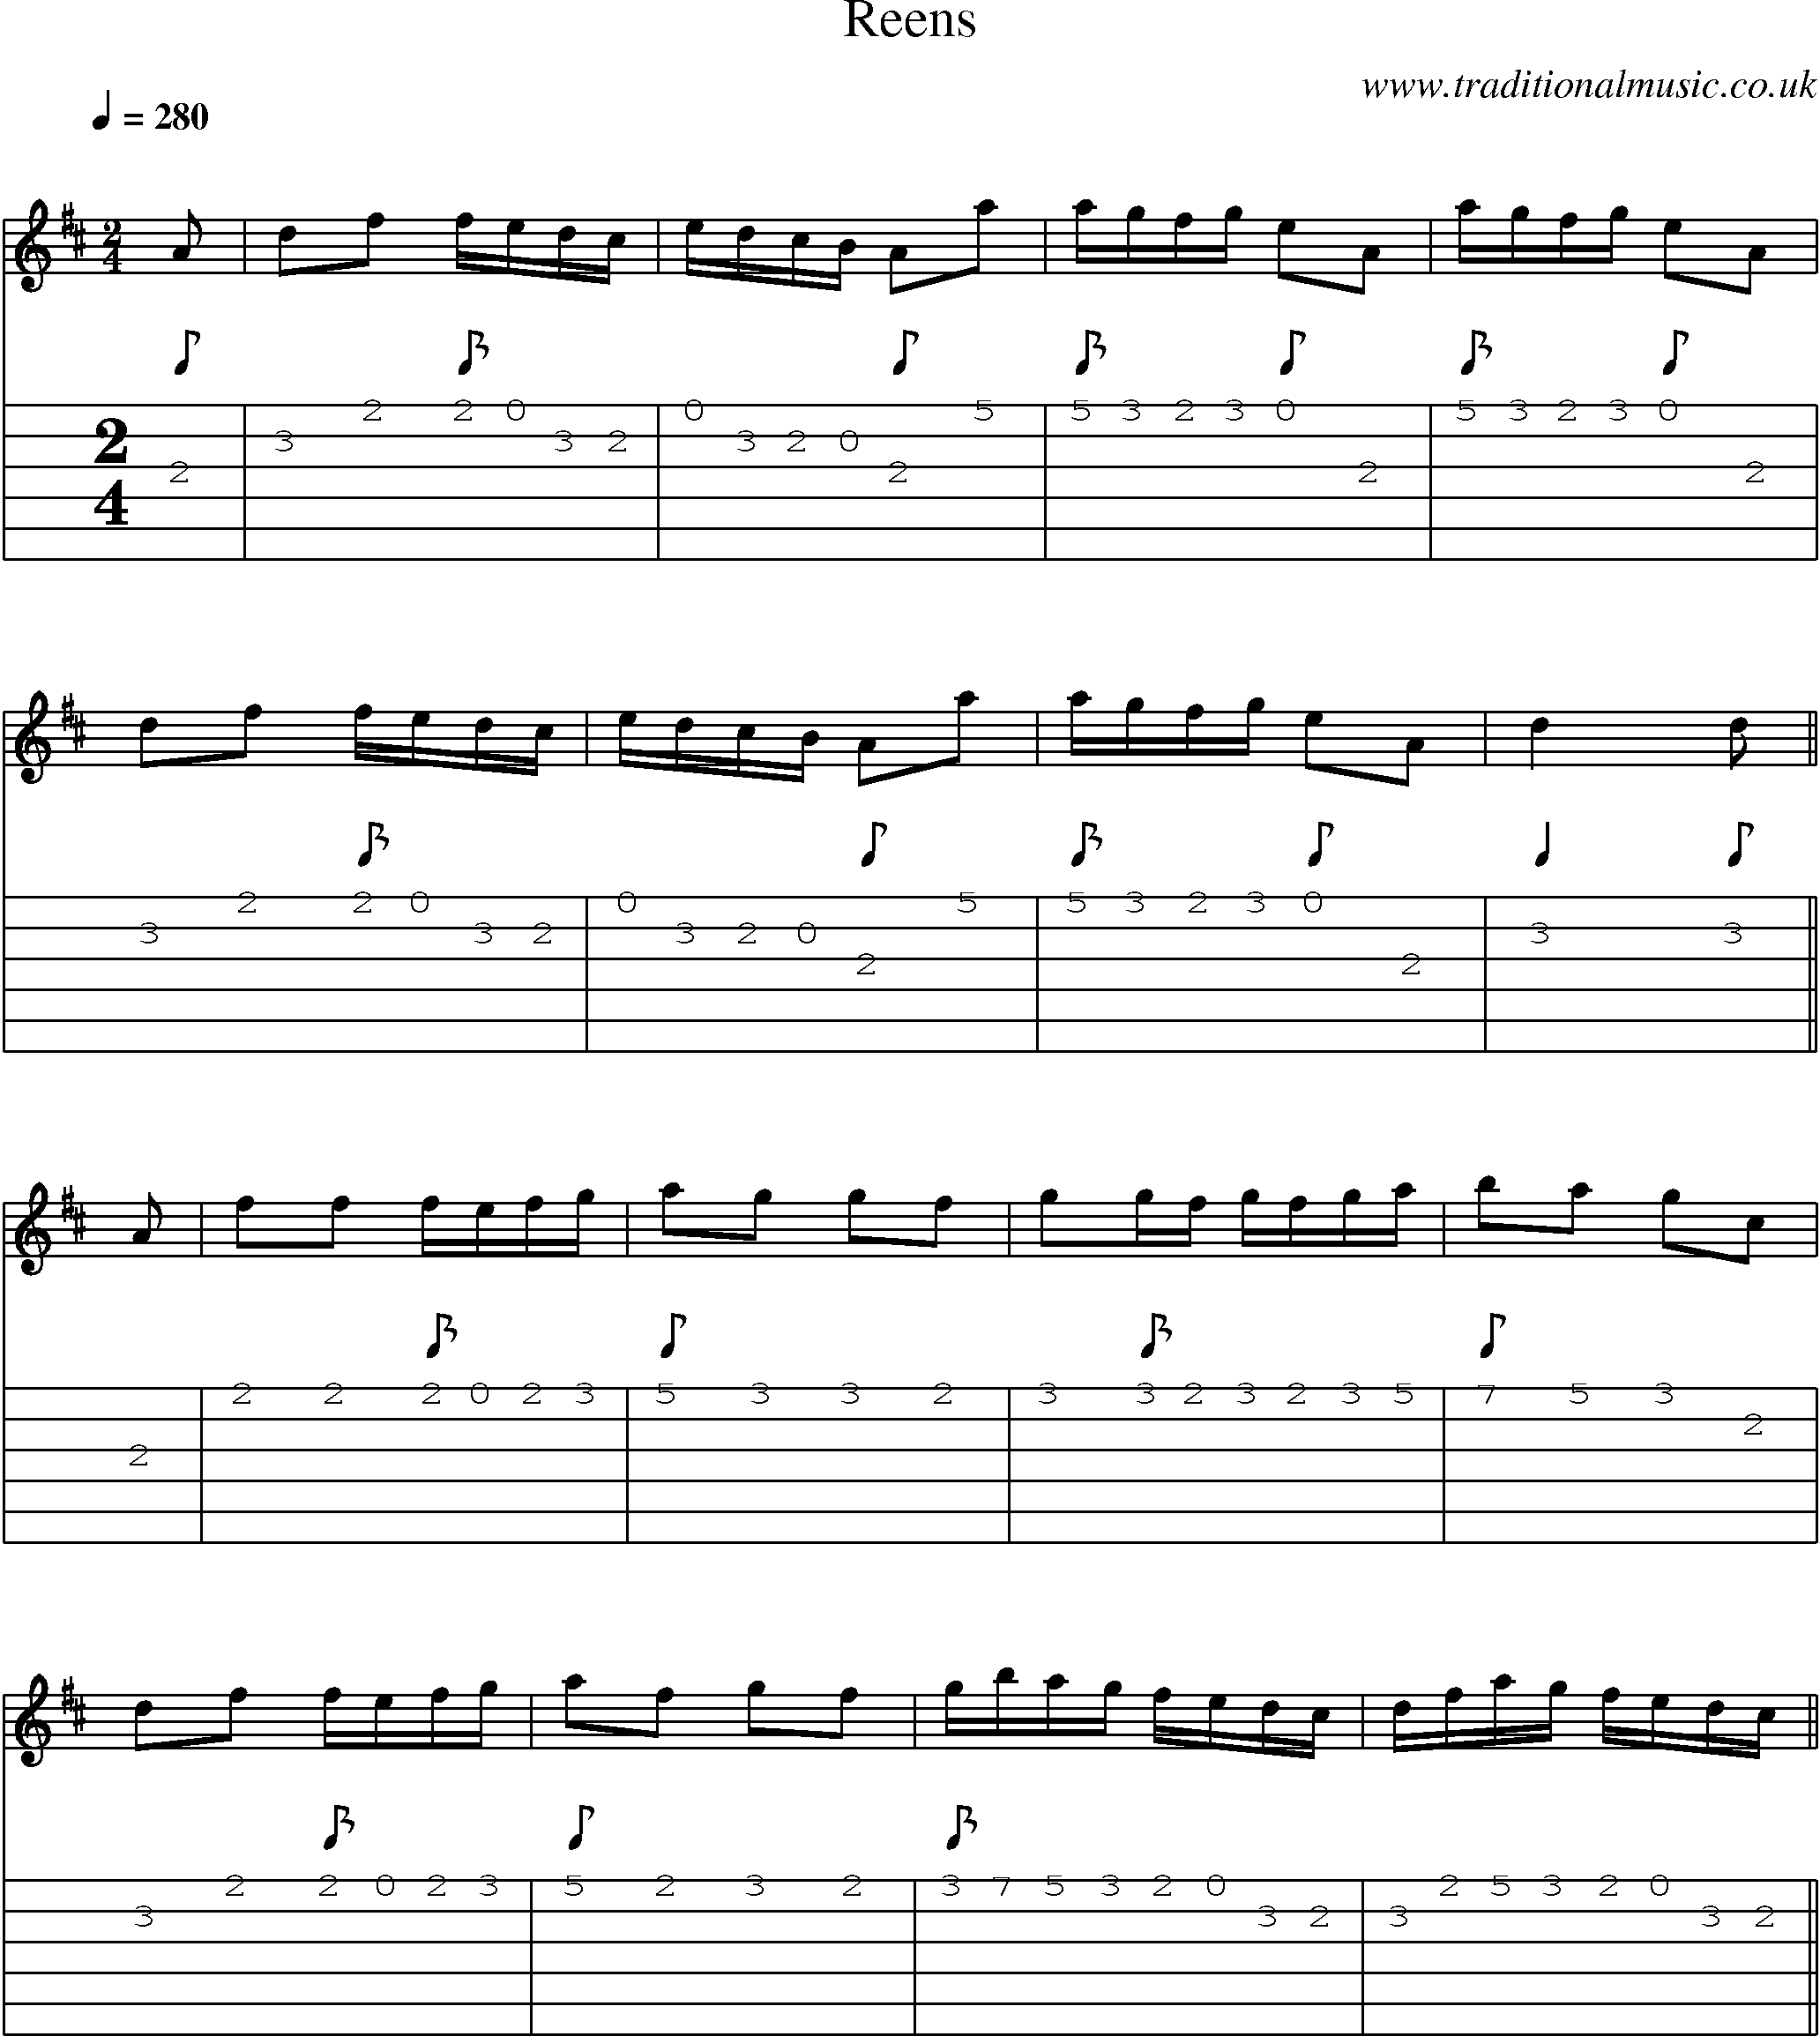 Music Score and Guitar Tabs for Reens